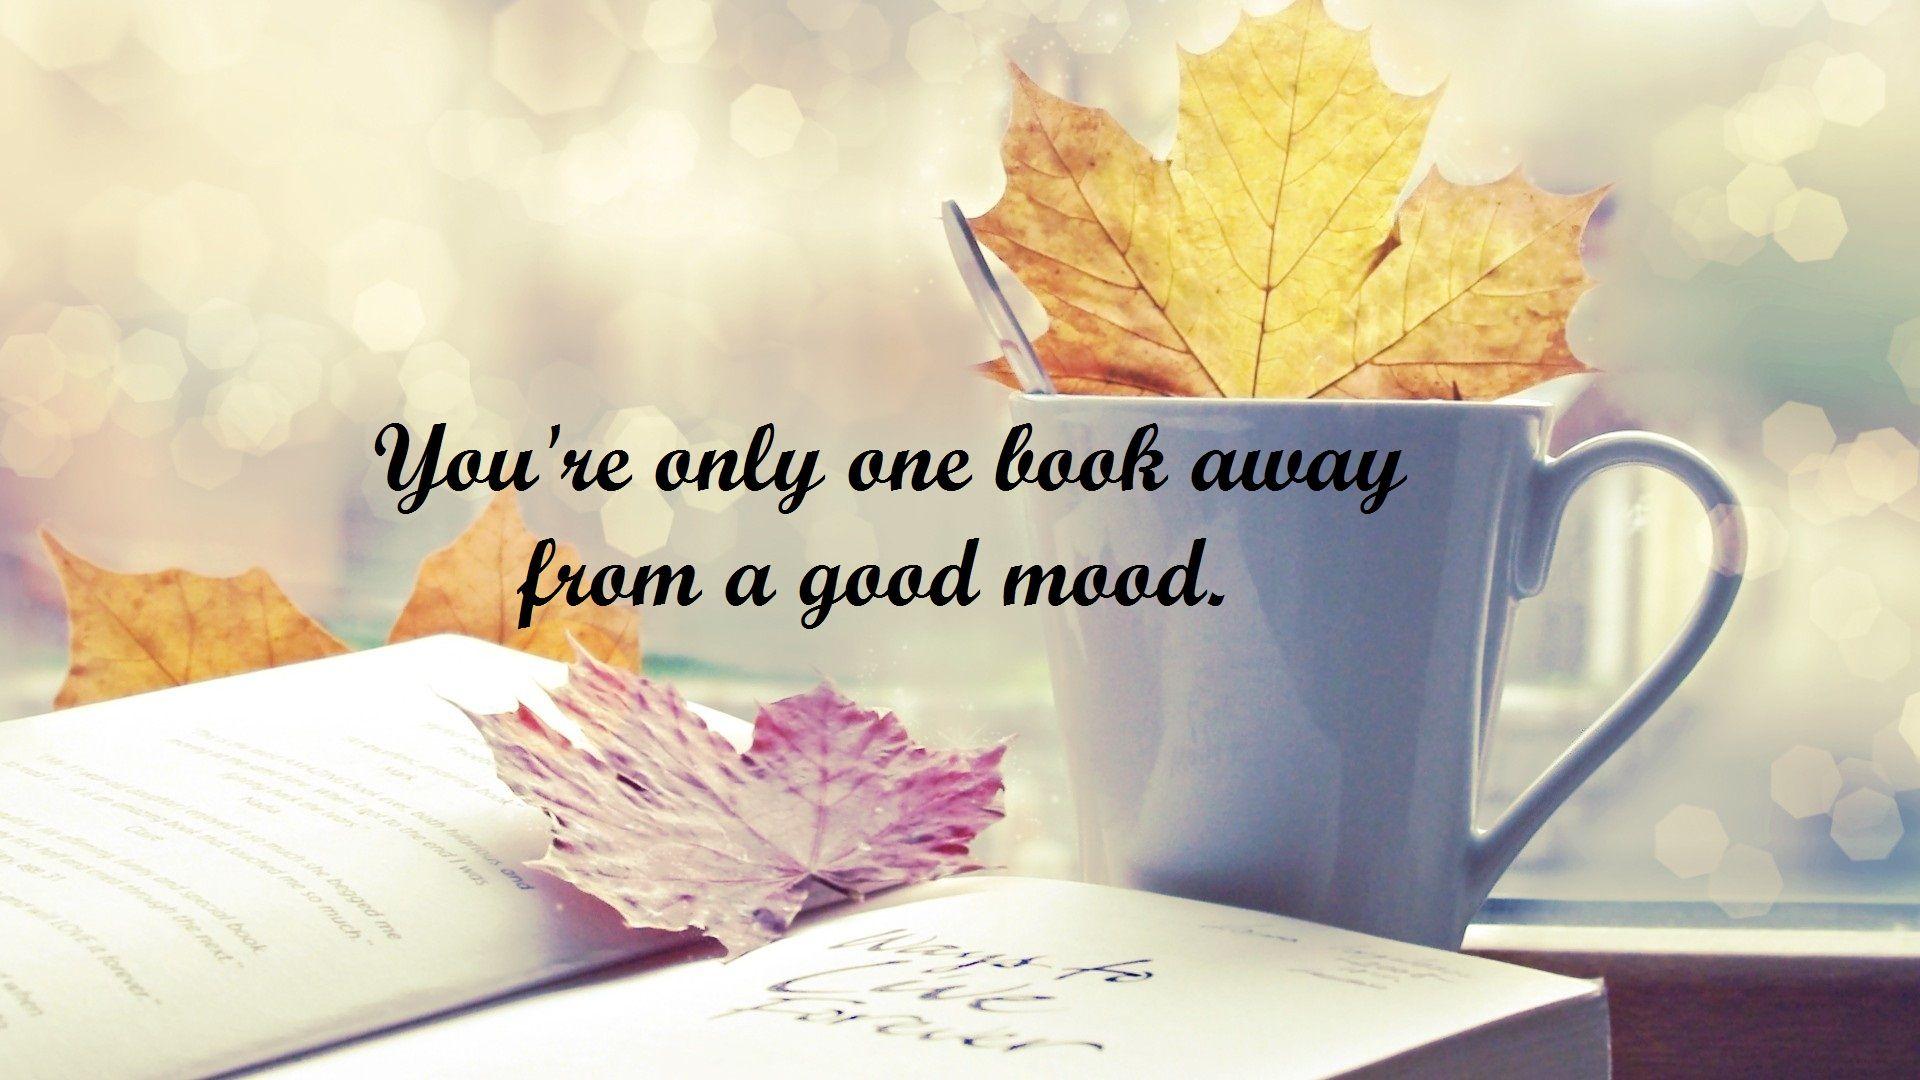 Boost your Mood with Books!